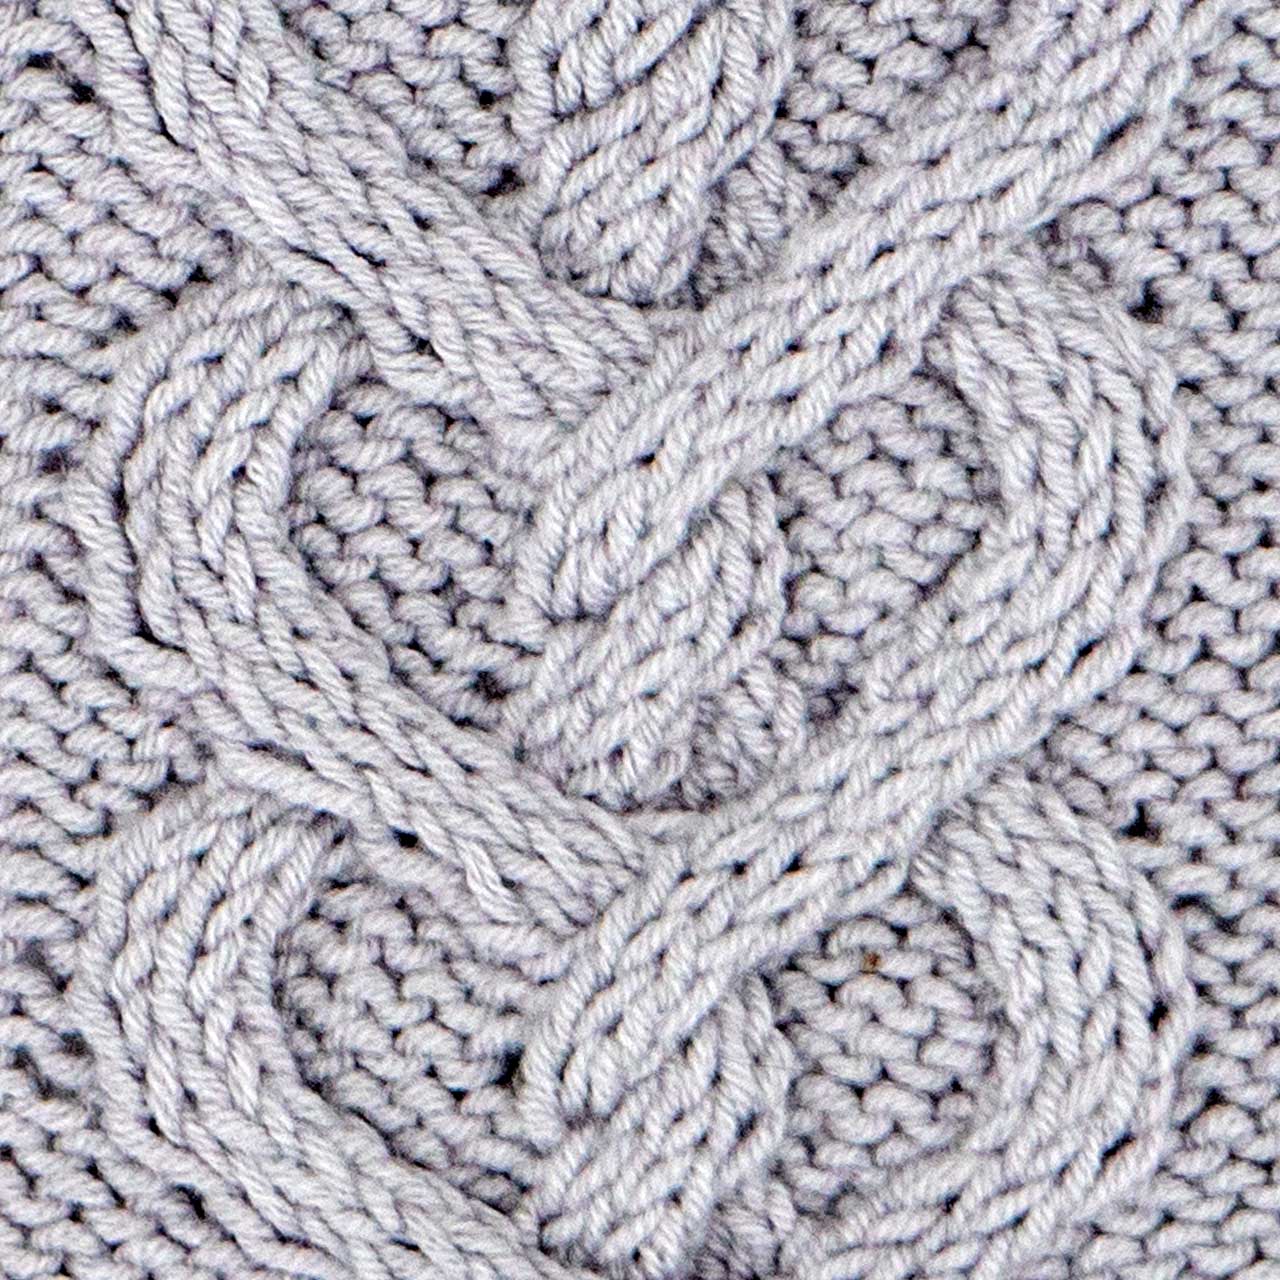 The Braided Heart Cable Stitch Knitting Stitch Pattern Dictionary